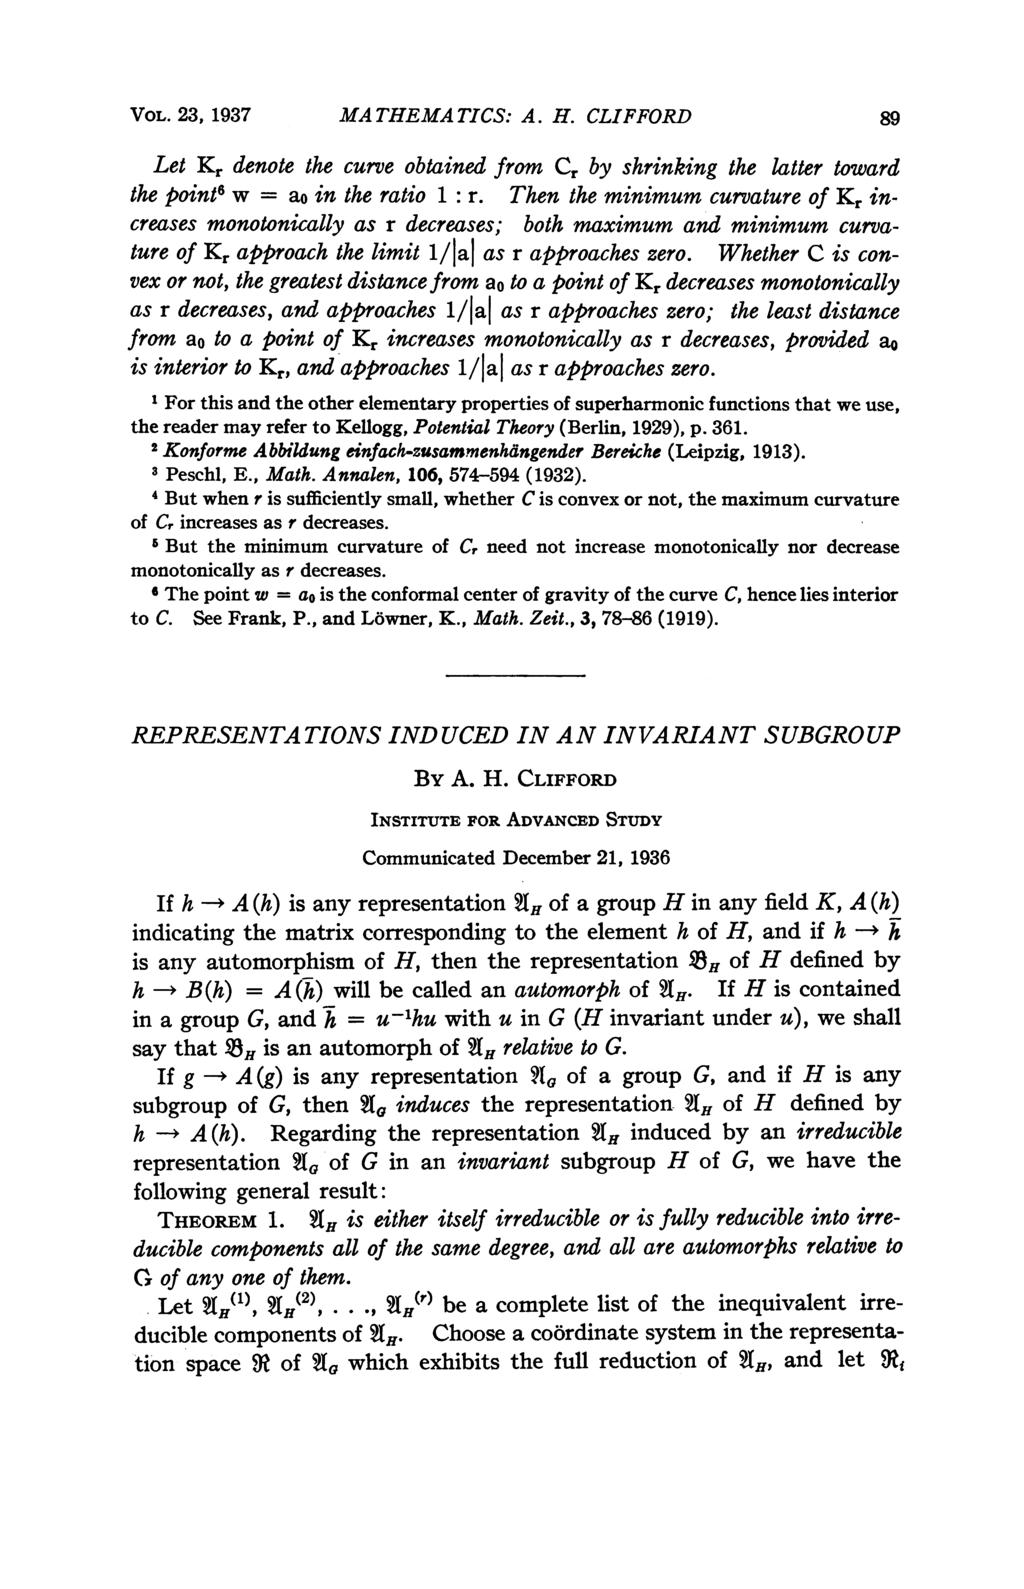 VOL. 23, 1937 MA THEMA TICS: A. H. CLIFFORD 89 Let Kr denote the curve obtained from Cr by shrinking the latter toward the point6 w = ao in the ratio 1: r.